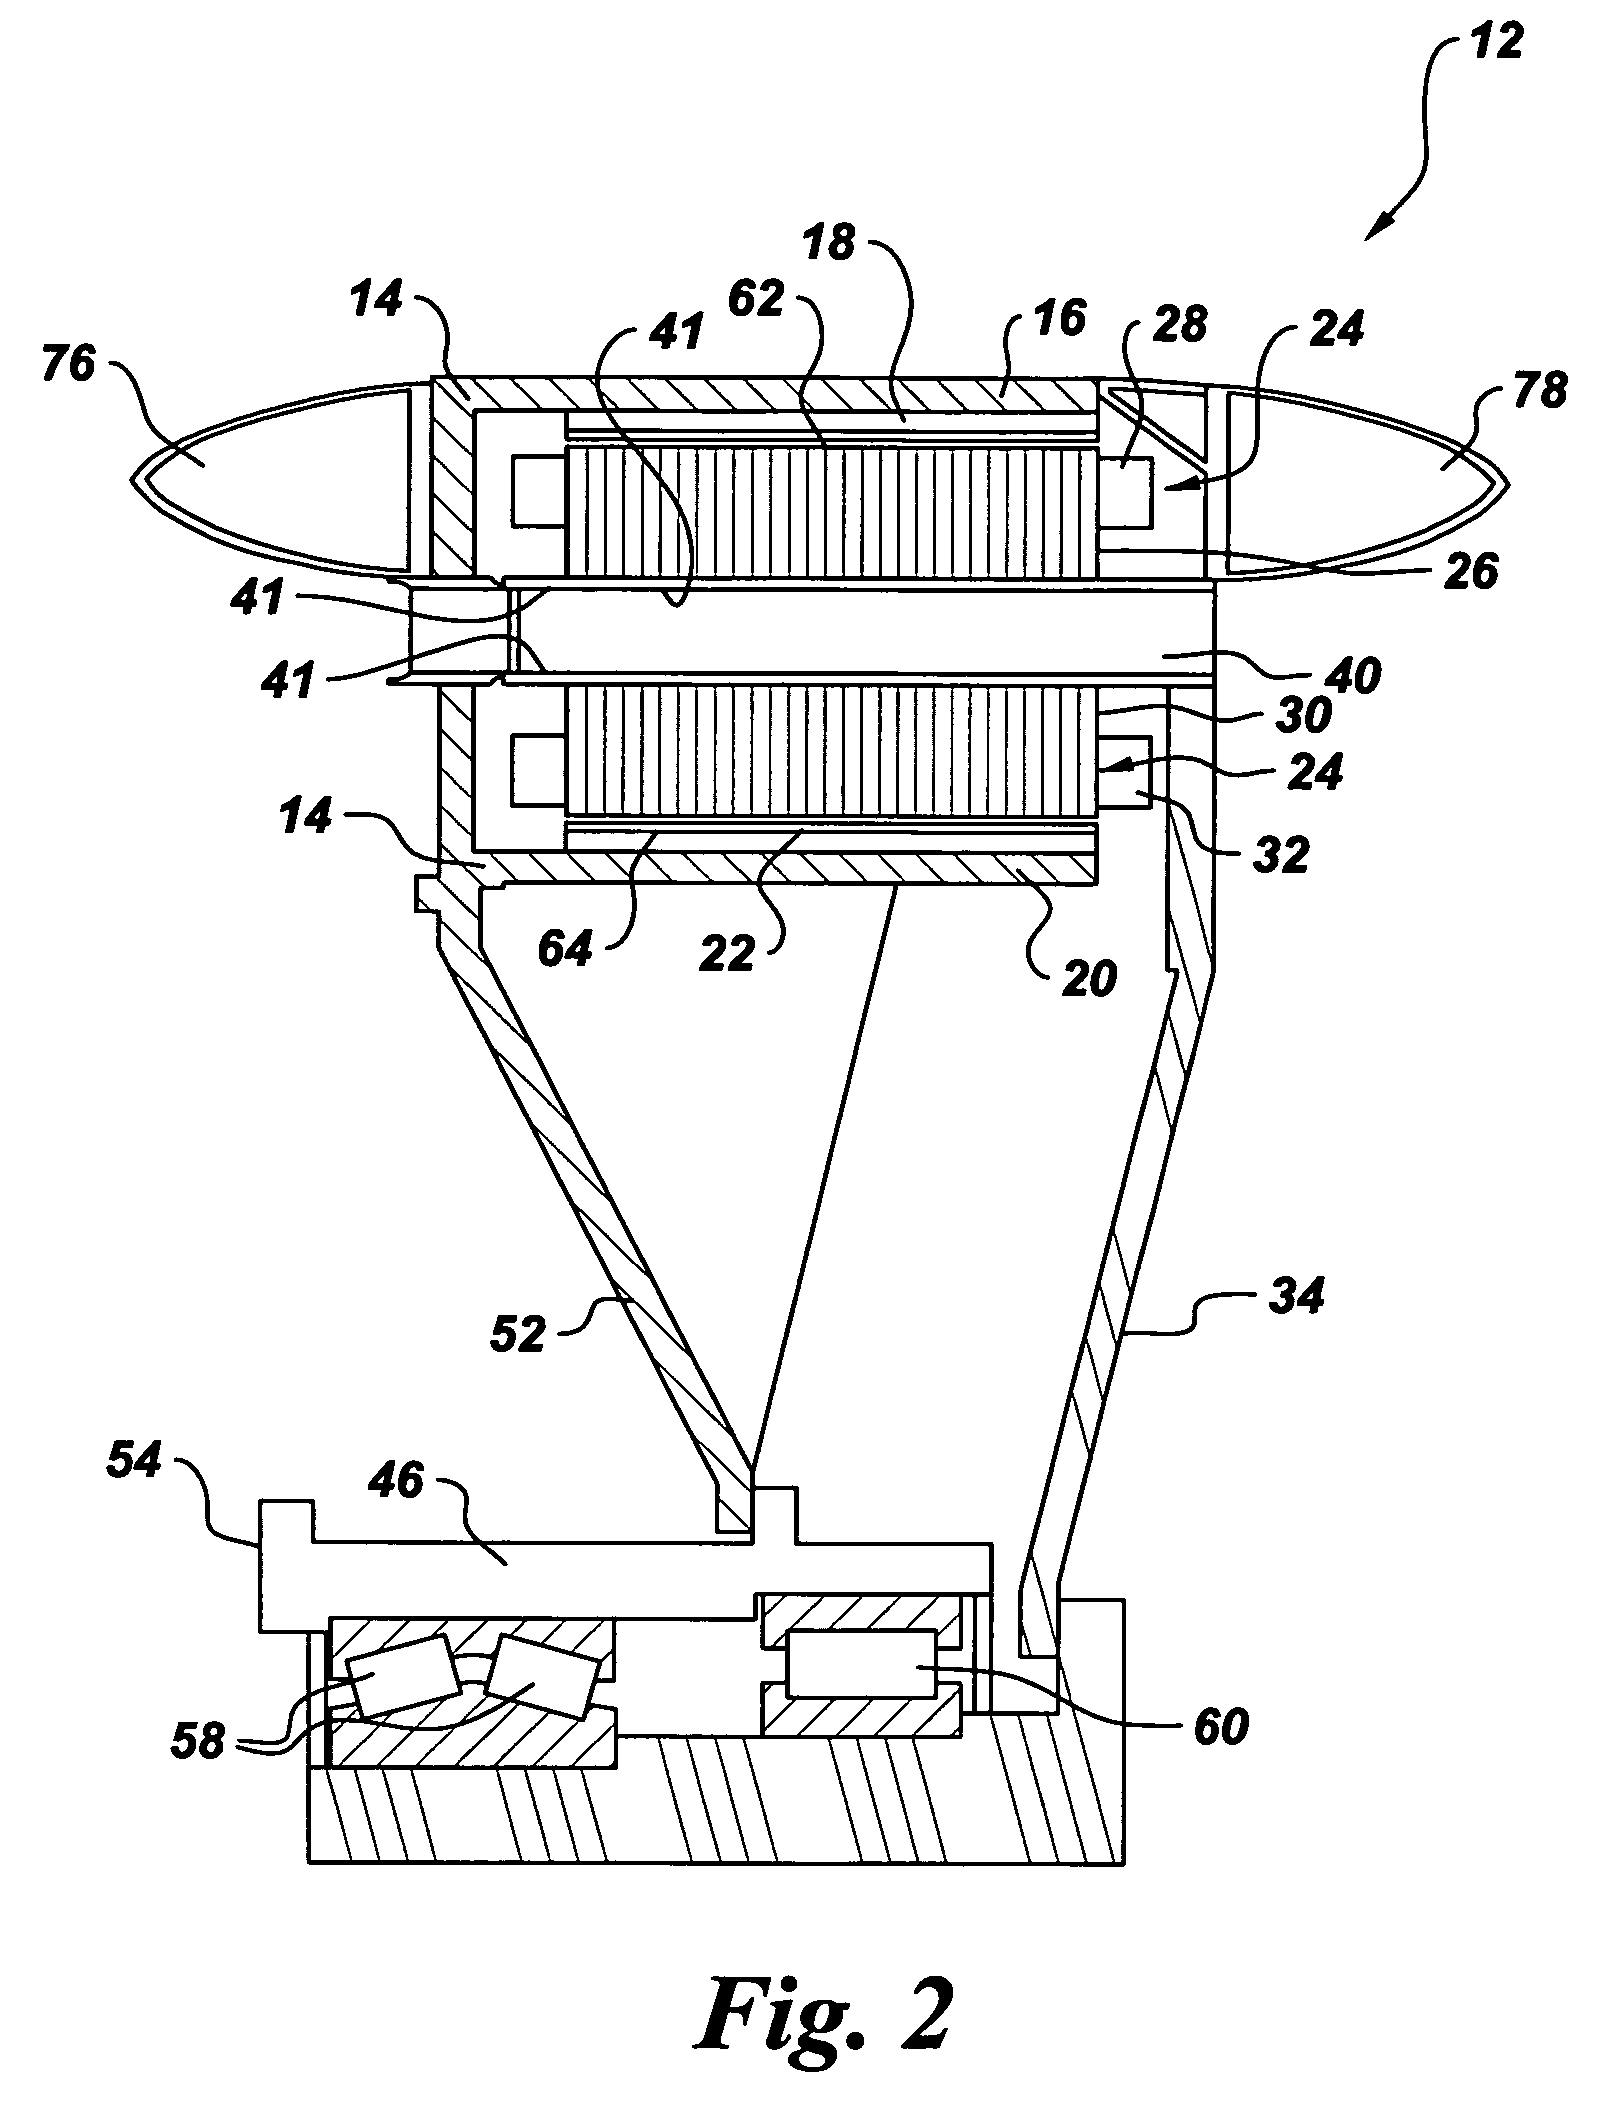 Electrical machine with double-sided stator